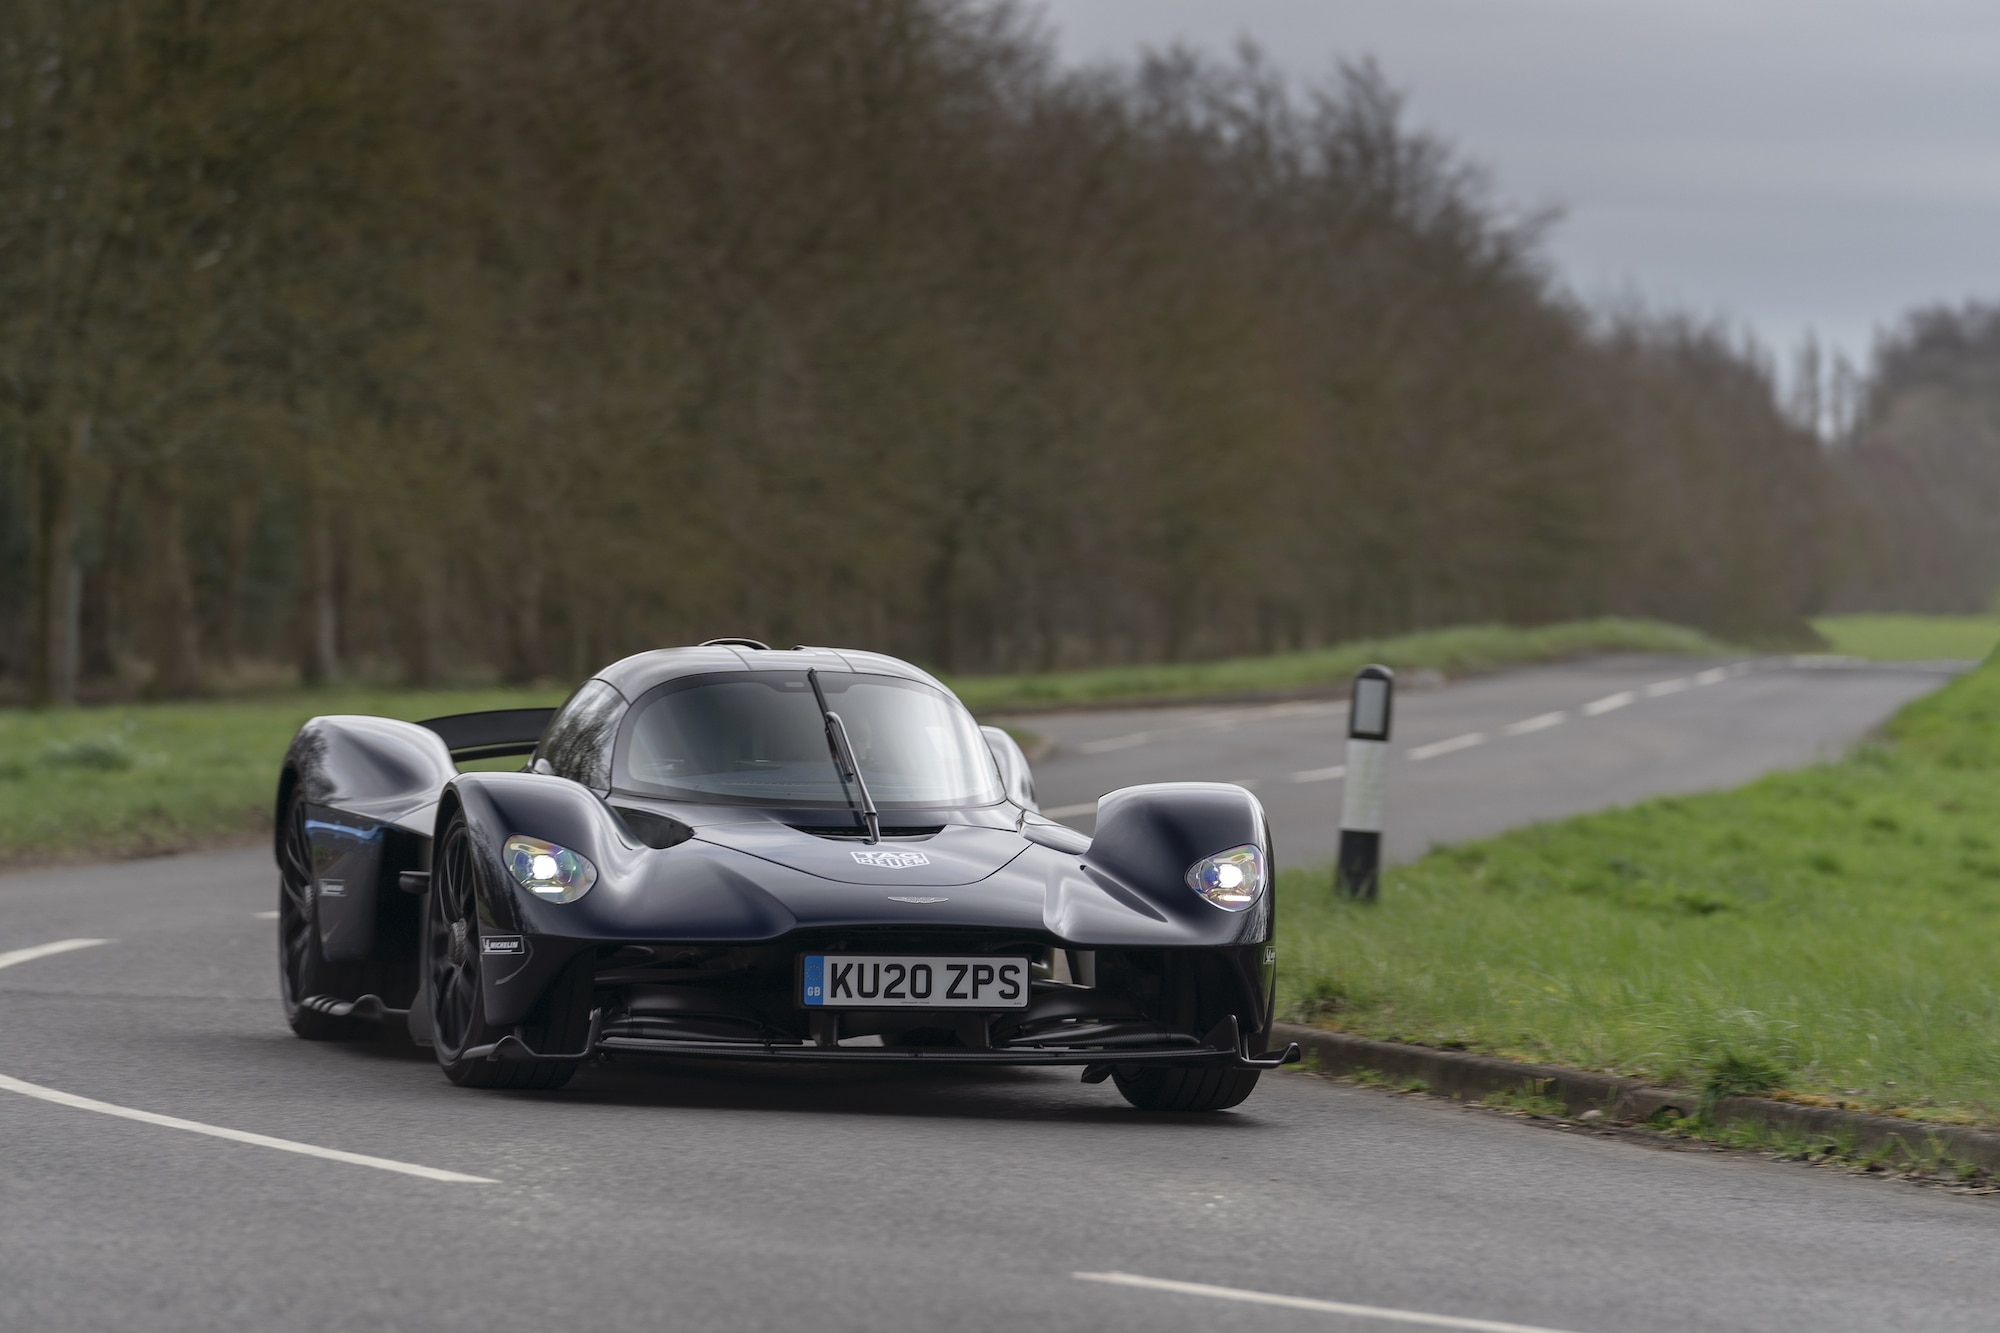 FIRST LOOK: The Aston Martin Valkyrie In The Wild